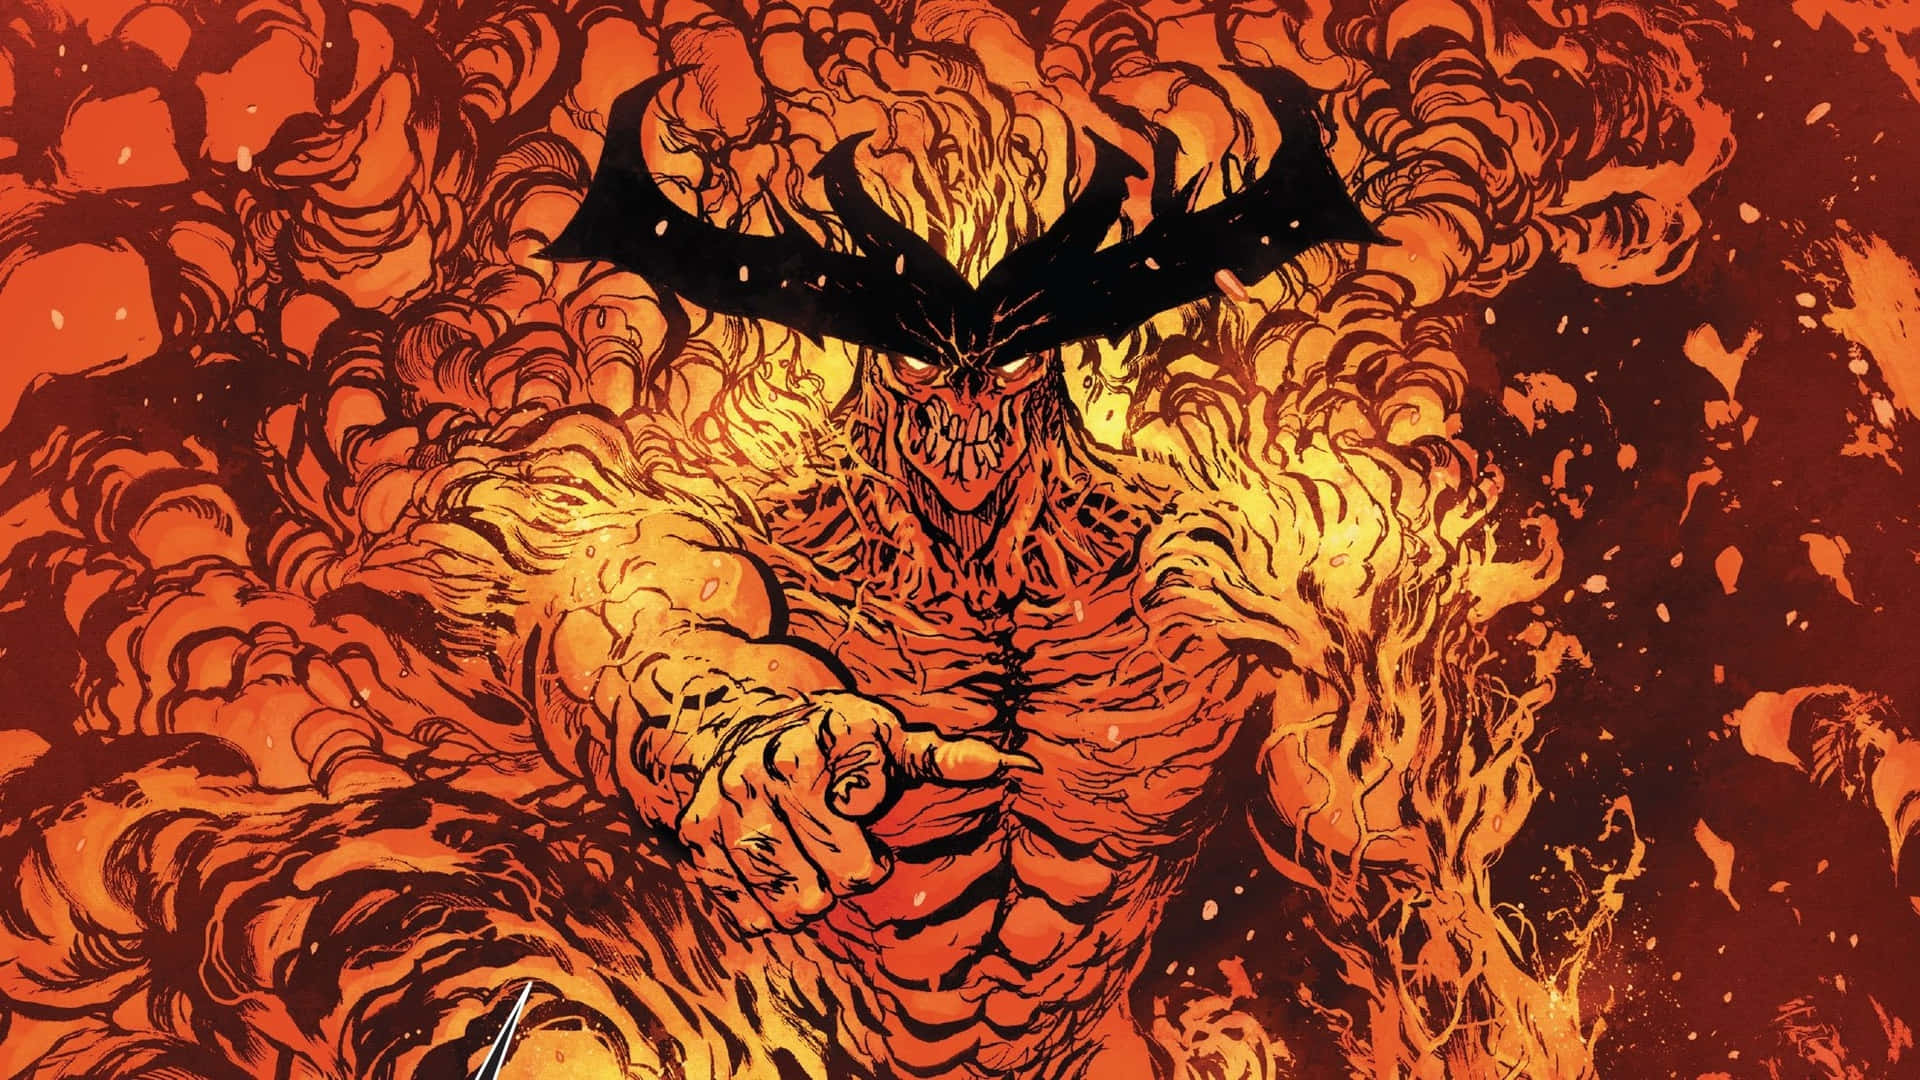 The Fire Giant Surtur seeks his revenge in the 1981 Animation Wallpaper